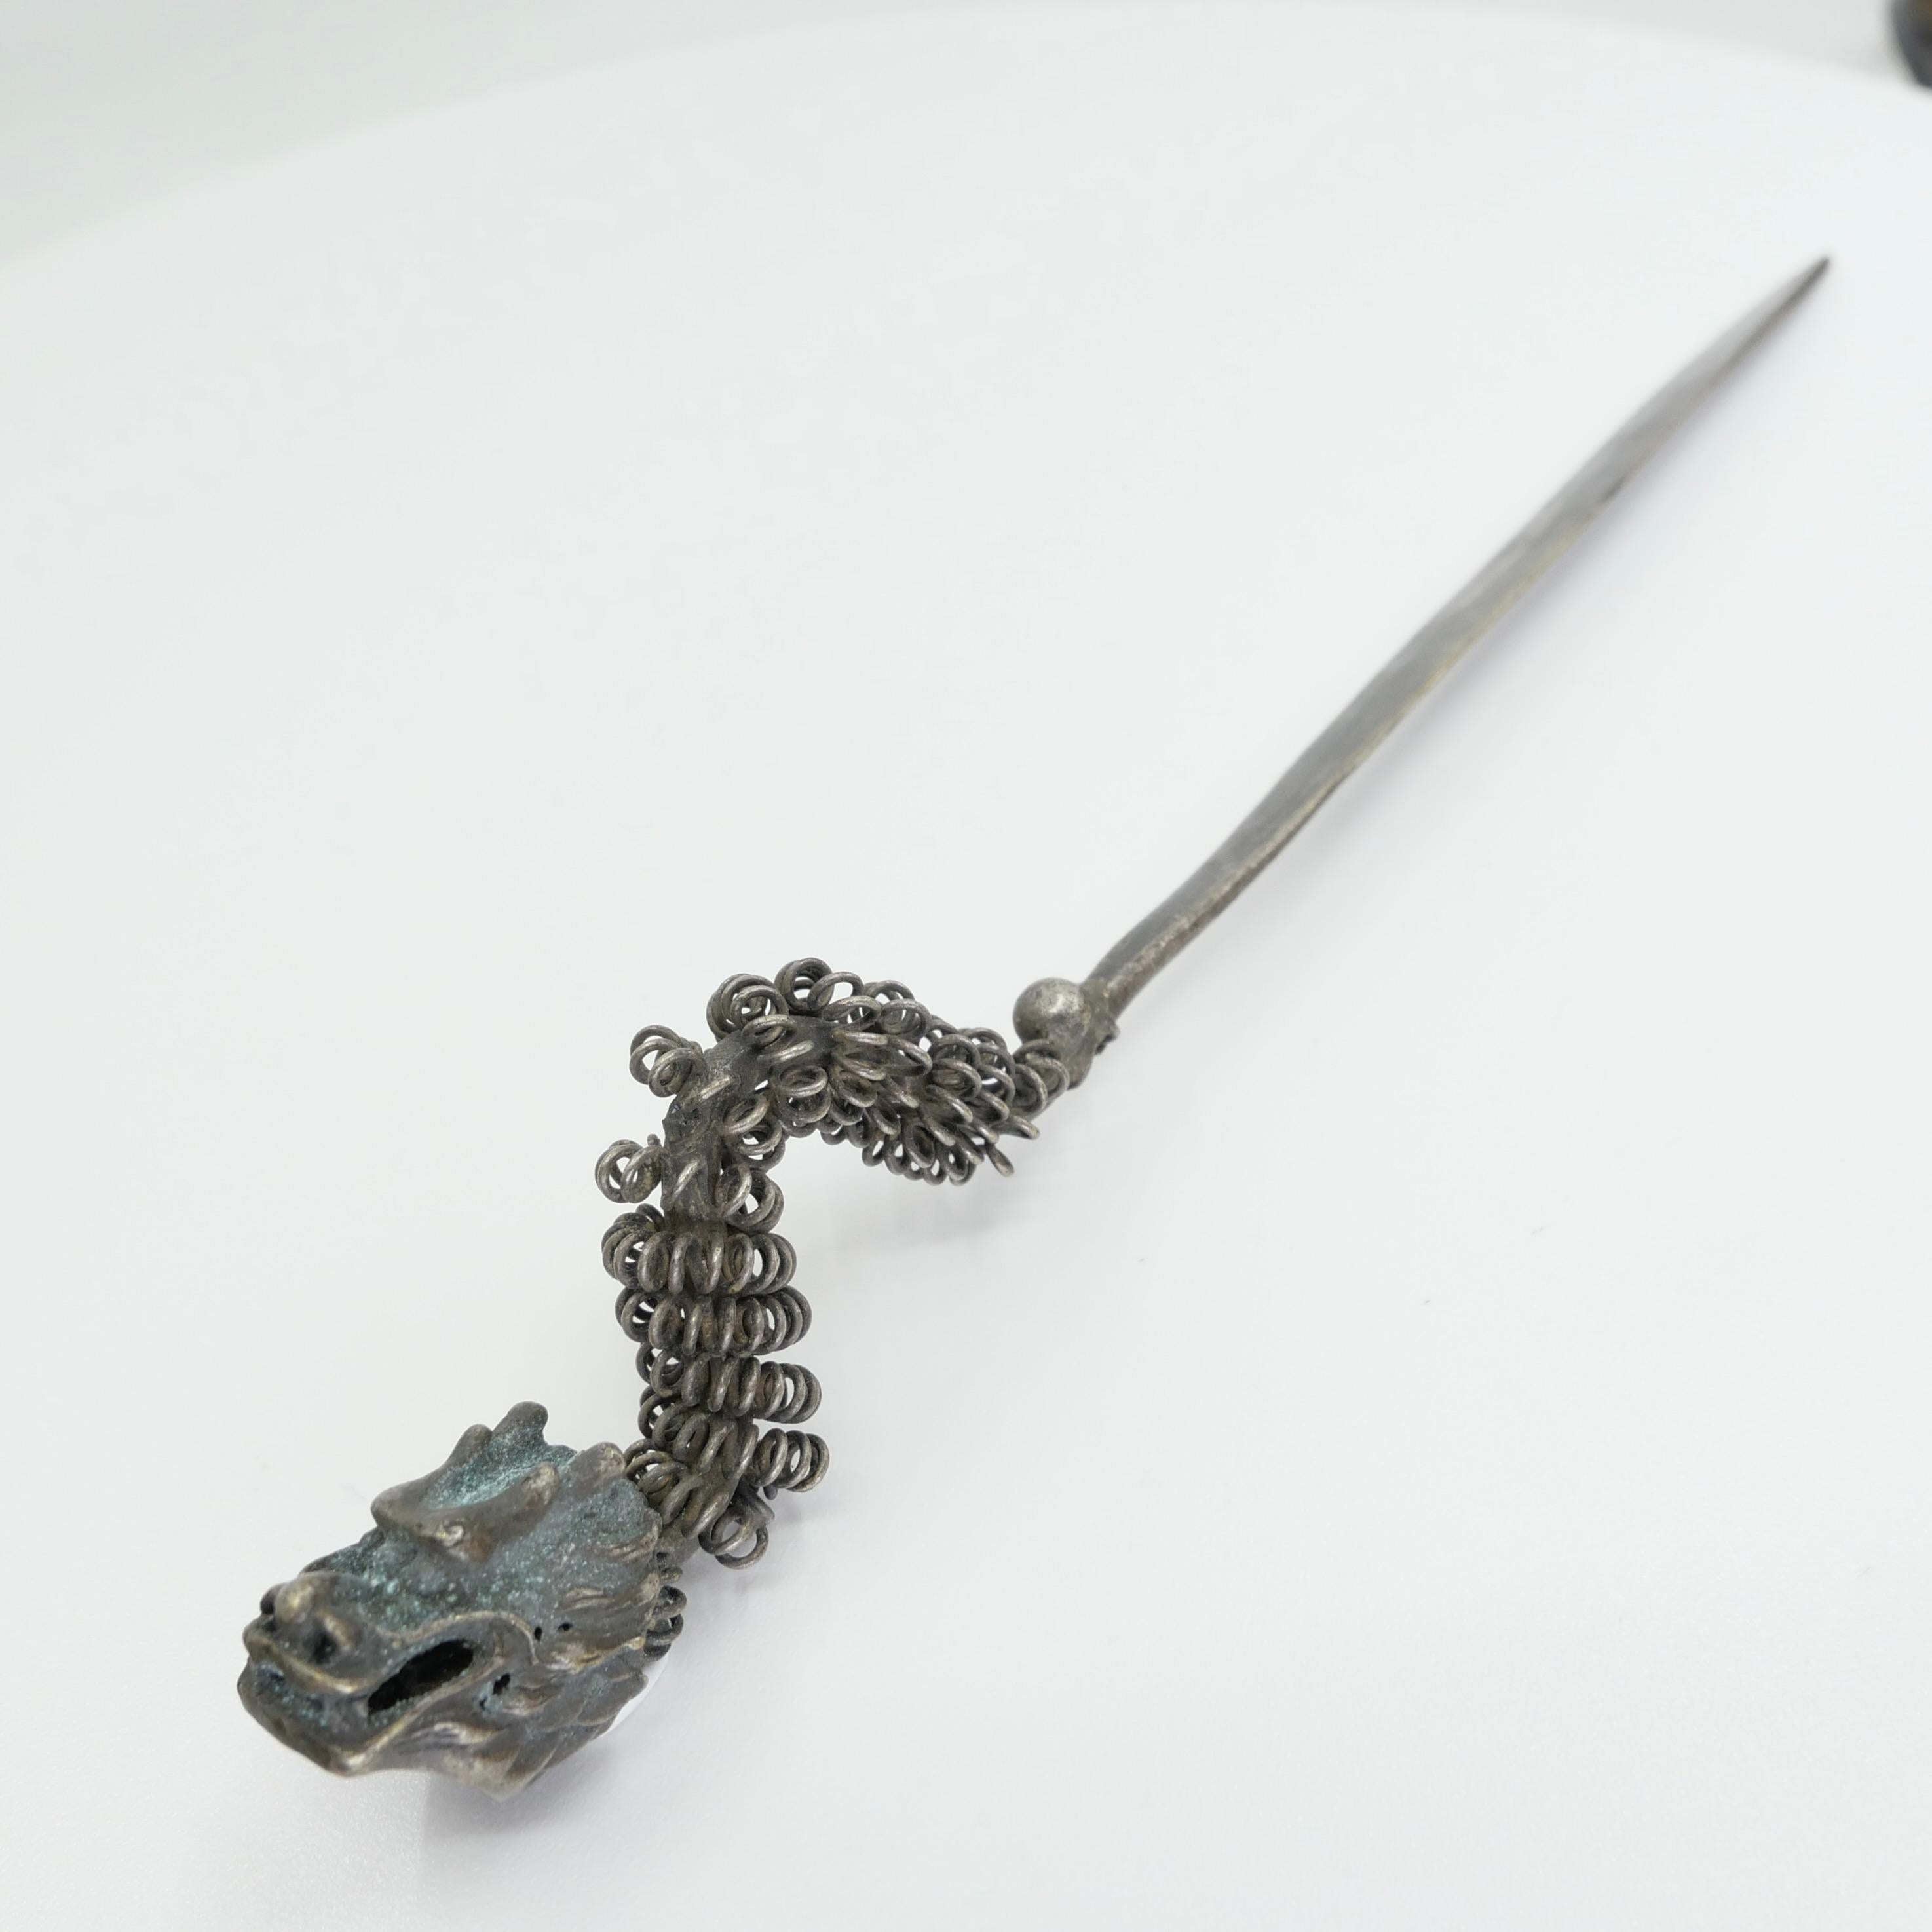 Handmade Antique Silver Dragon Hairpin, One of a Kind with Excellent Workmanship For Sale 11